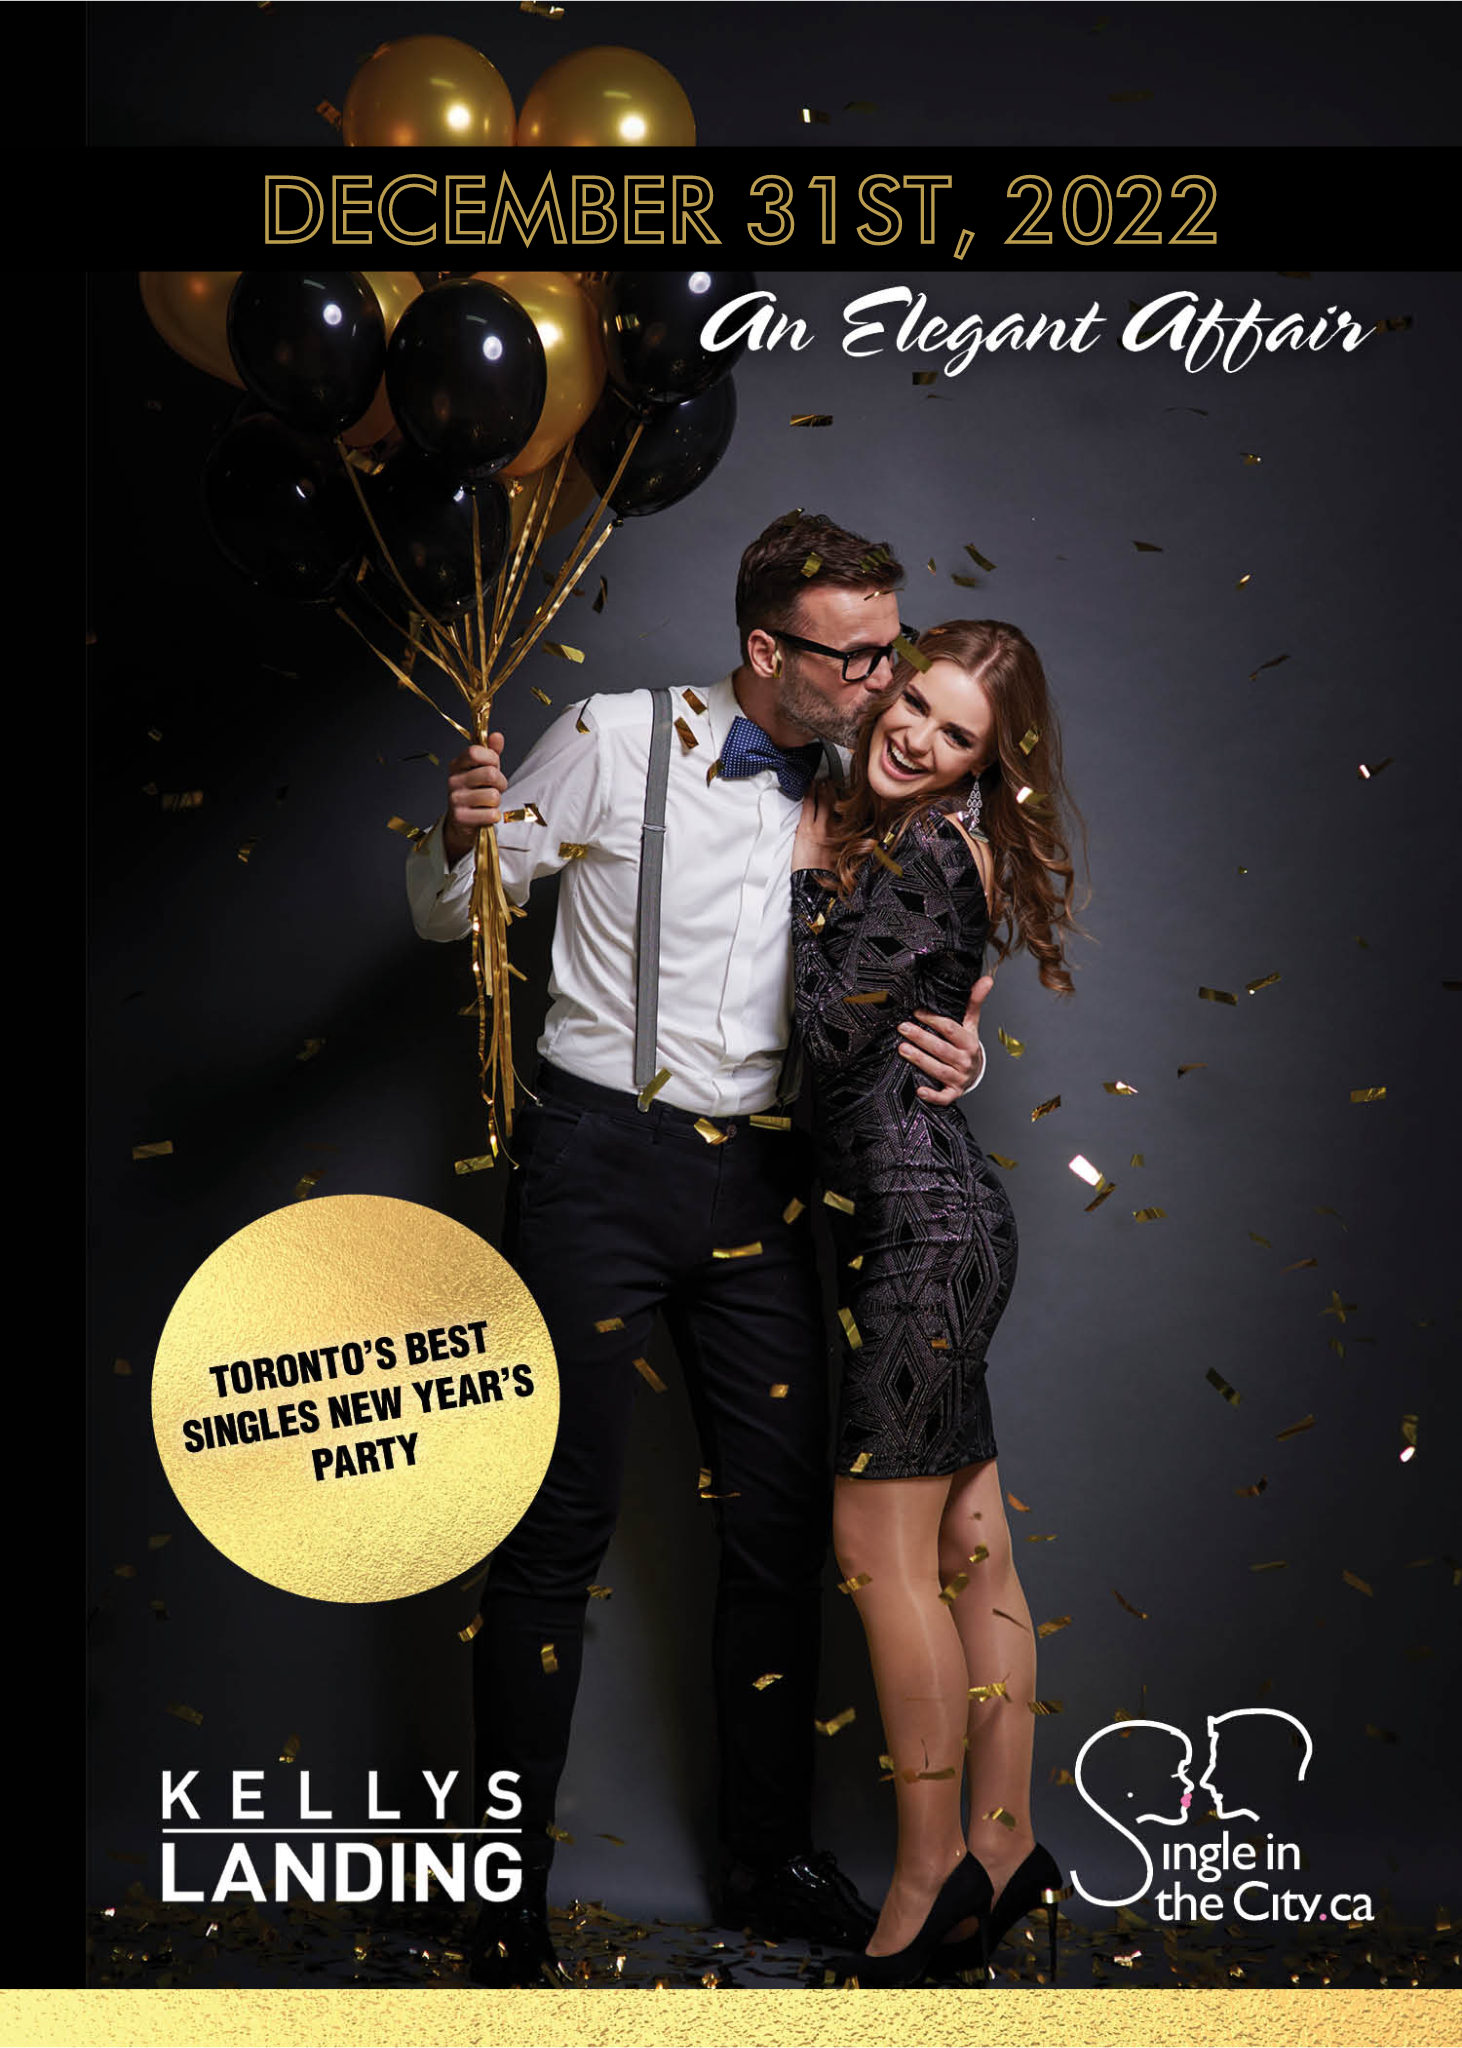 Toronto's Best Singles New Year's Eve Party "An Elegant Affair"